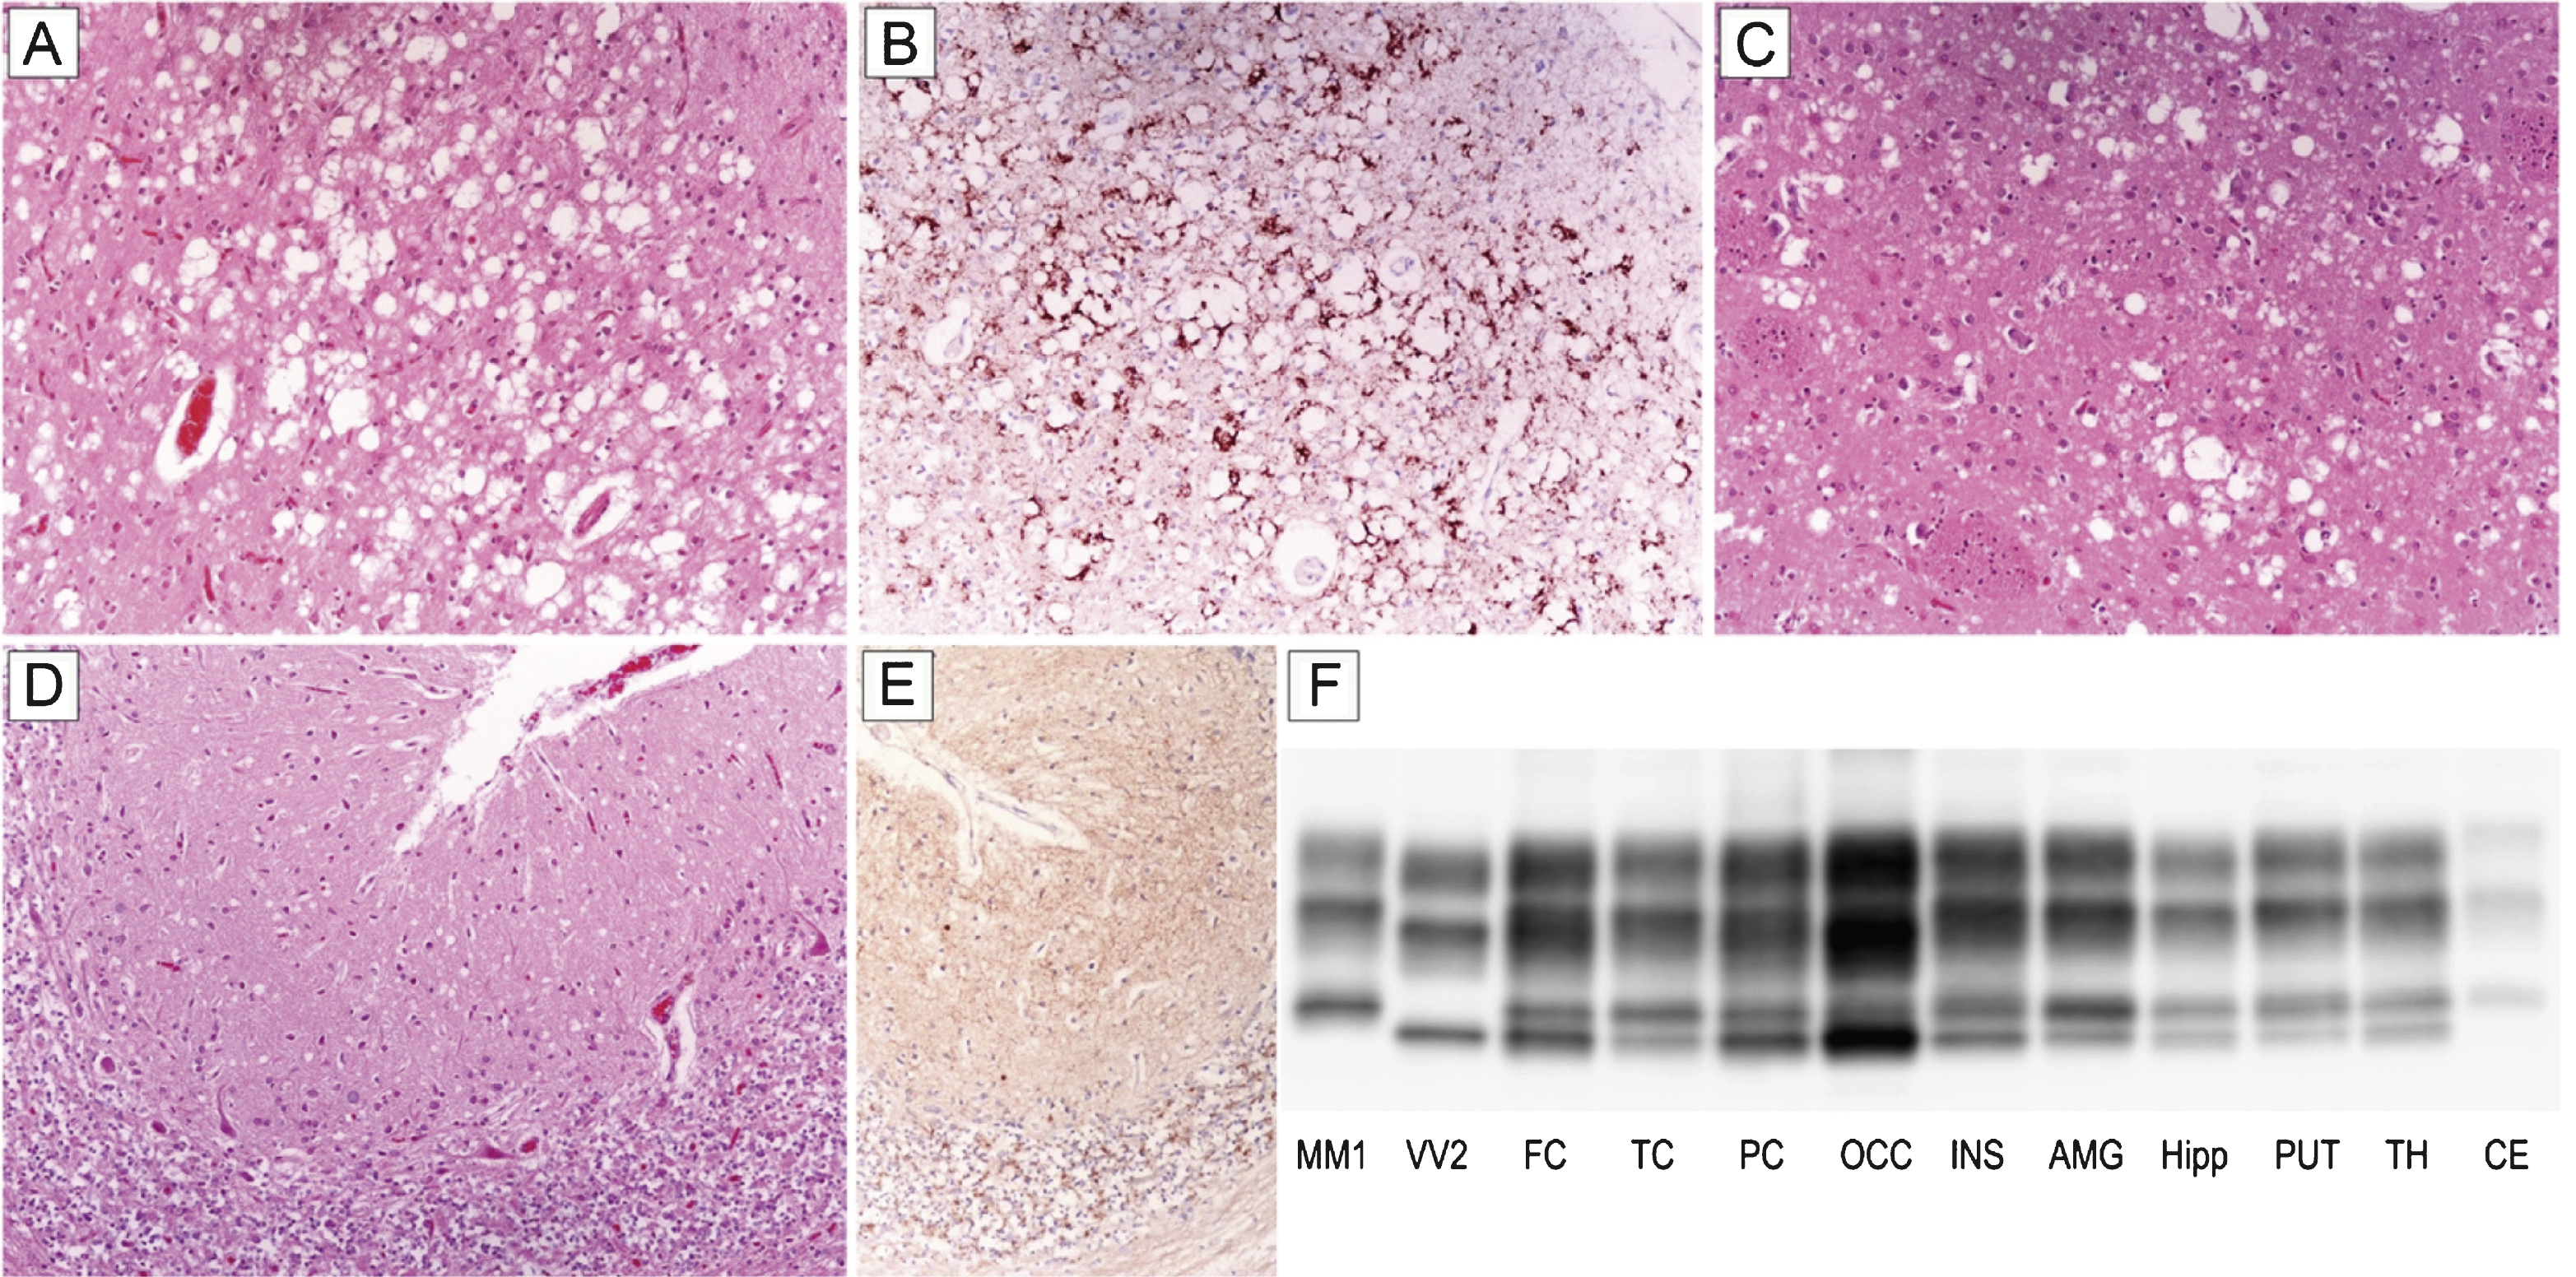 Distinctive histopathology and regional distribution of PrPSc in patient #16 (MM 2C+1). (A) Spongiform change characterized by large, confluent vacuoles (H&E stain) and (B) perivacuolar and coarse PrP deposits (PrP immunohistochemistry) in the occipital cortex; (C) mixed type of spongiform change with large, confluent vacuoles intermixed with smaller vacuoles in the striatum (H&E stain); (D) spongiform change characterized by small, fine, microvacuoles (H&E stain) and (E) synaptic pattern of PrP deposition in the cerebellum (PrP immunohistochemistry). All pictures (A-E) have the same magnification (×100); F) PrPSc typing by western blot showing the co-occurrence of protein types 1 and 2 in all regions but the cerebellum, where only a relatively low amount of type 1 is seen. While the amount of PrPSc type 2 is higher than that of type 1 in most samples from the cerebral cortex, subcortical gray matter structures show either a similar amount of the two proteins or a predominant accumulation of type 1.